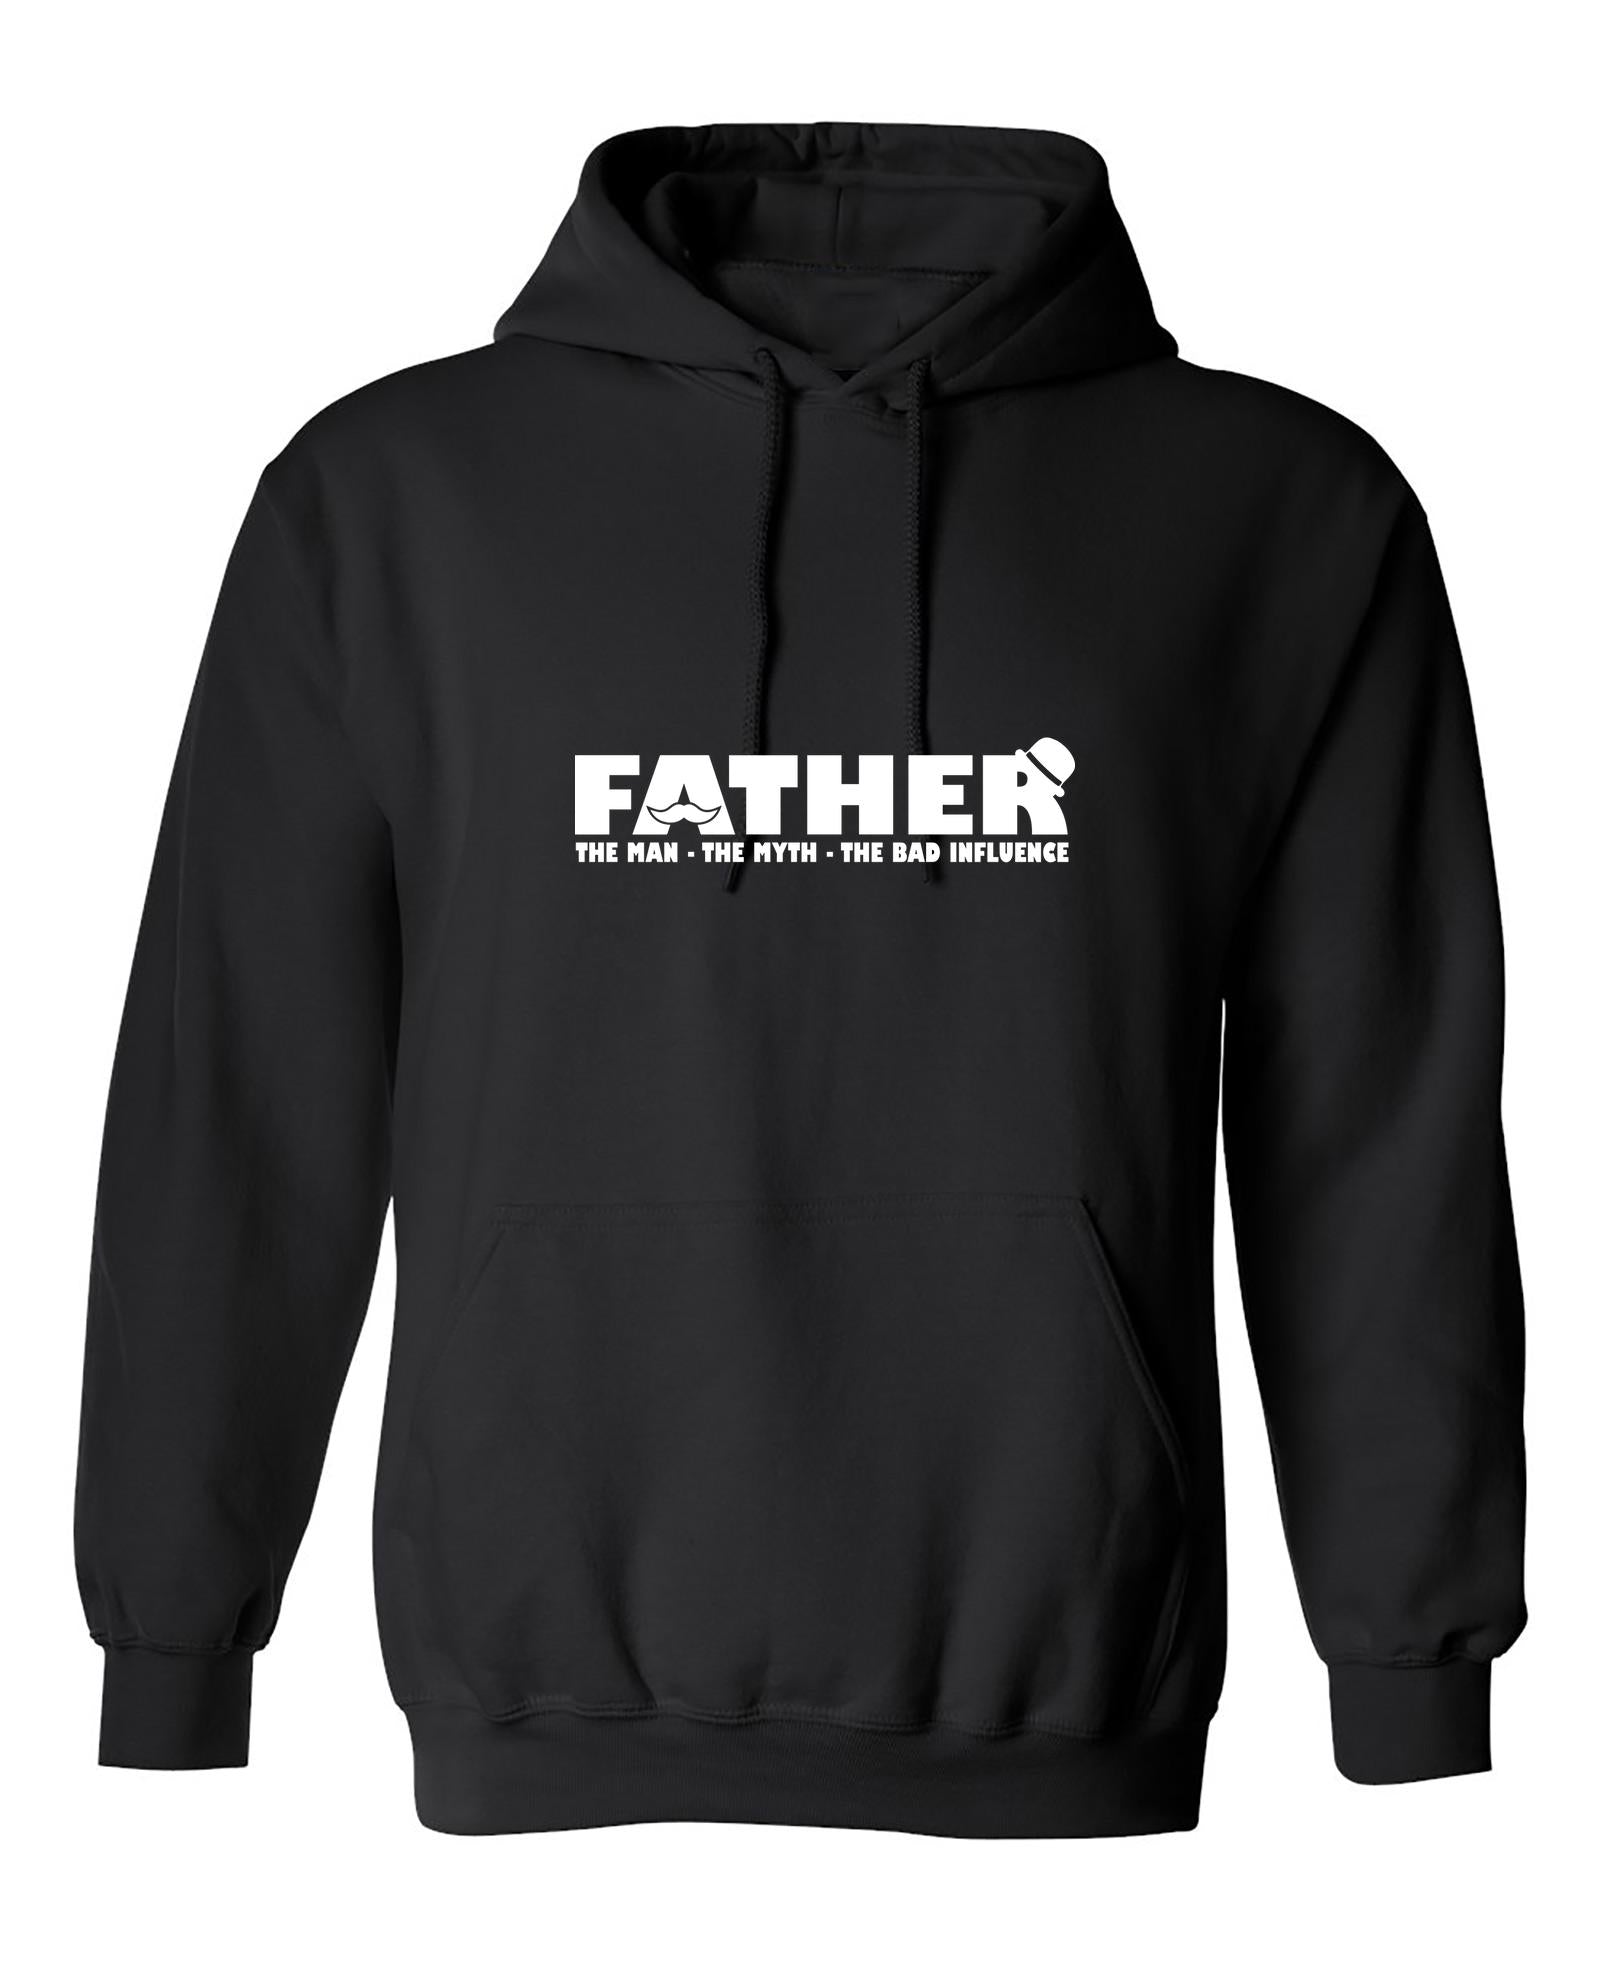 Funny T-Shirts design "Father, The Man, The Myth, The Bad Influence"